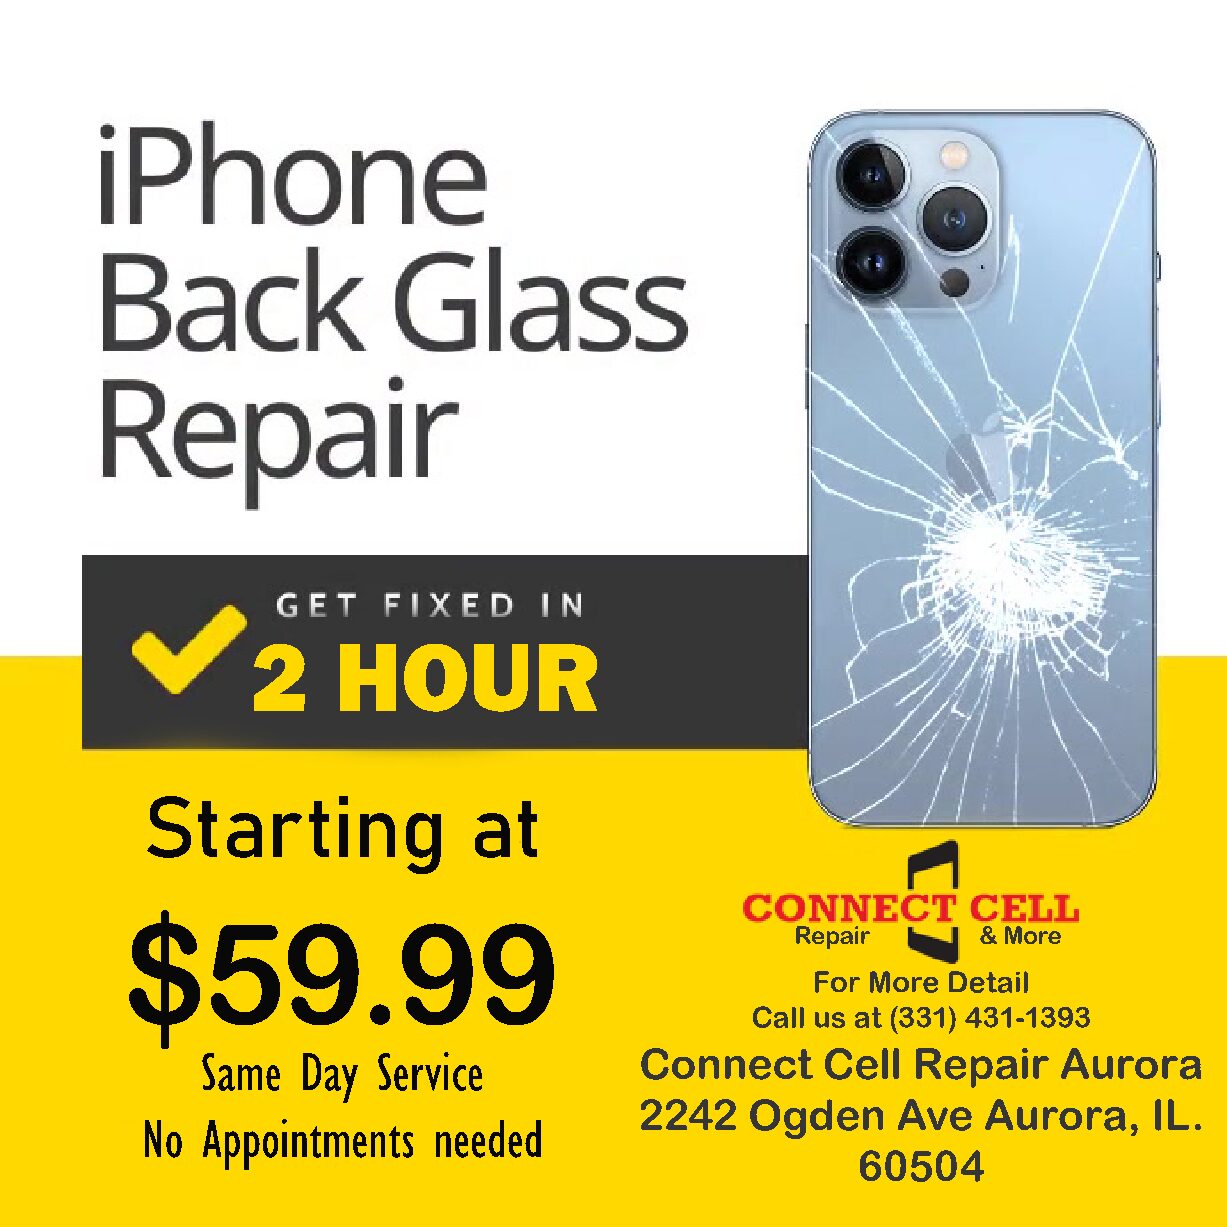 Revive Your iPhone: Expert Back Glass Repair at Connect Cell Repair Aurora